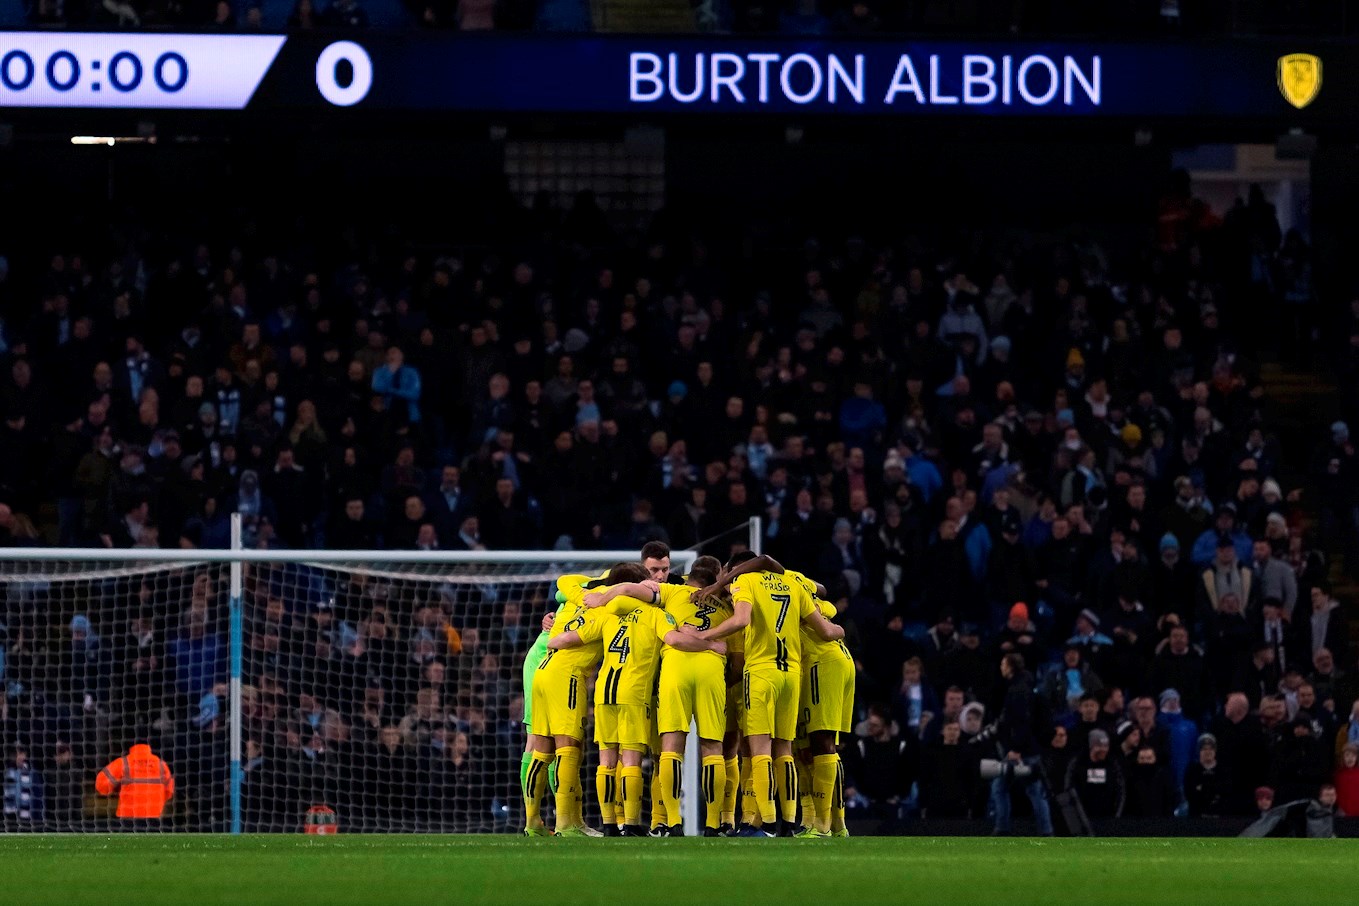 BURTON Albion get into a huddle ahead of our Carabao Cup semi-final first leg away at Manchester City